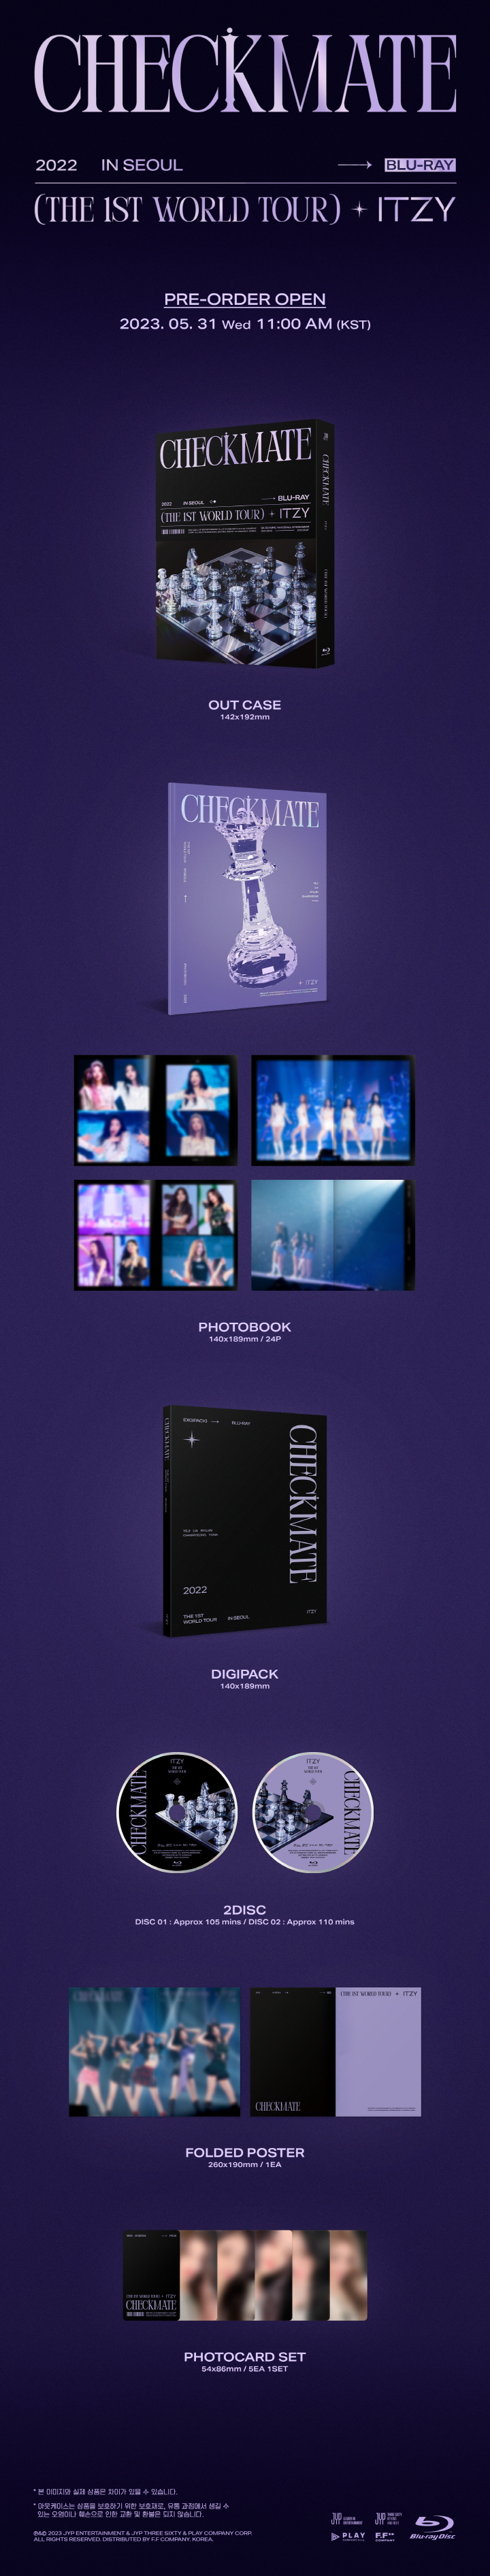 ITZY 2022 The 1st World Tour Checkmate in Seoul Blu-Ray + POB Set